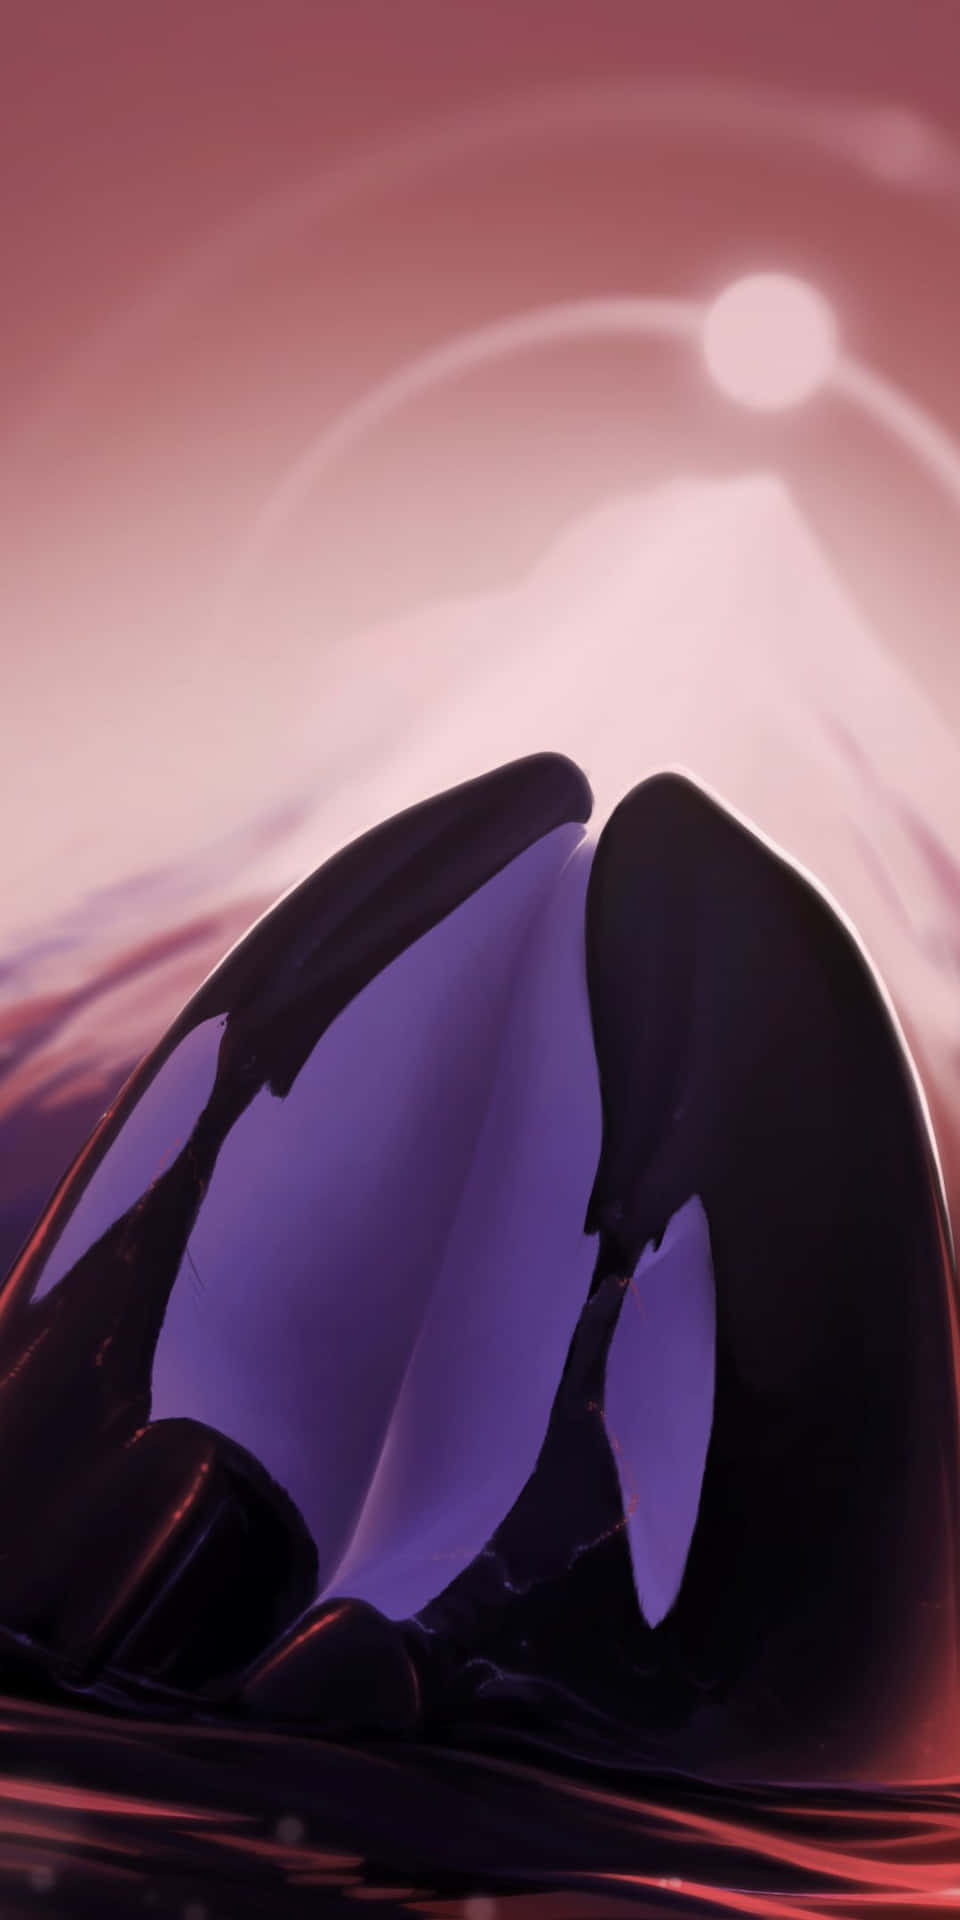 An Orca Whale Is Floating In The Water